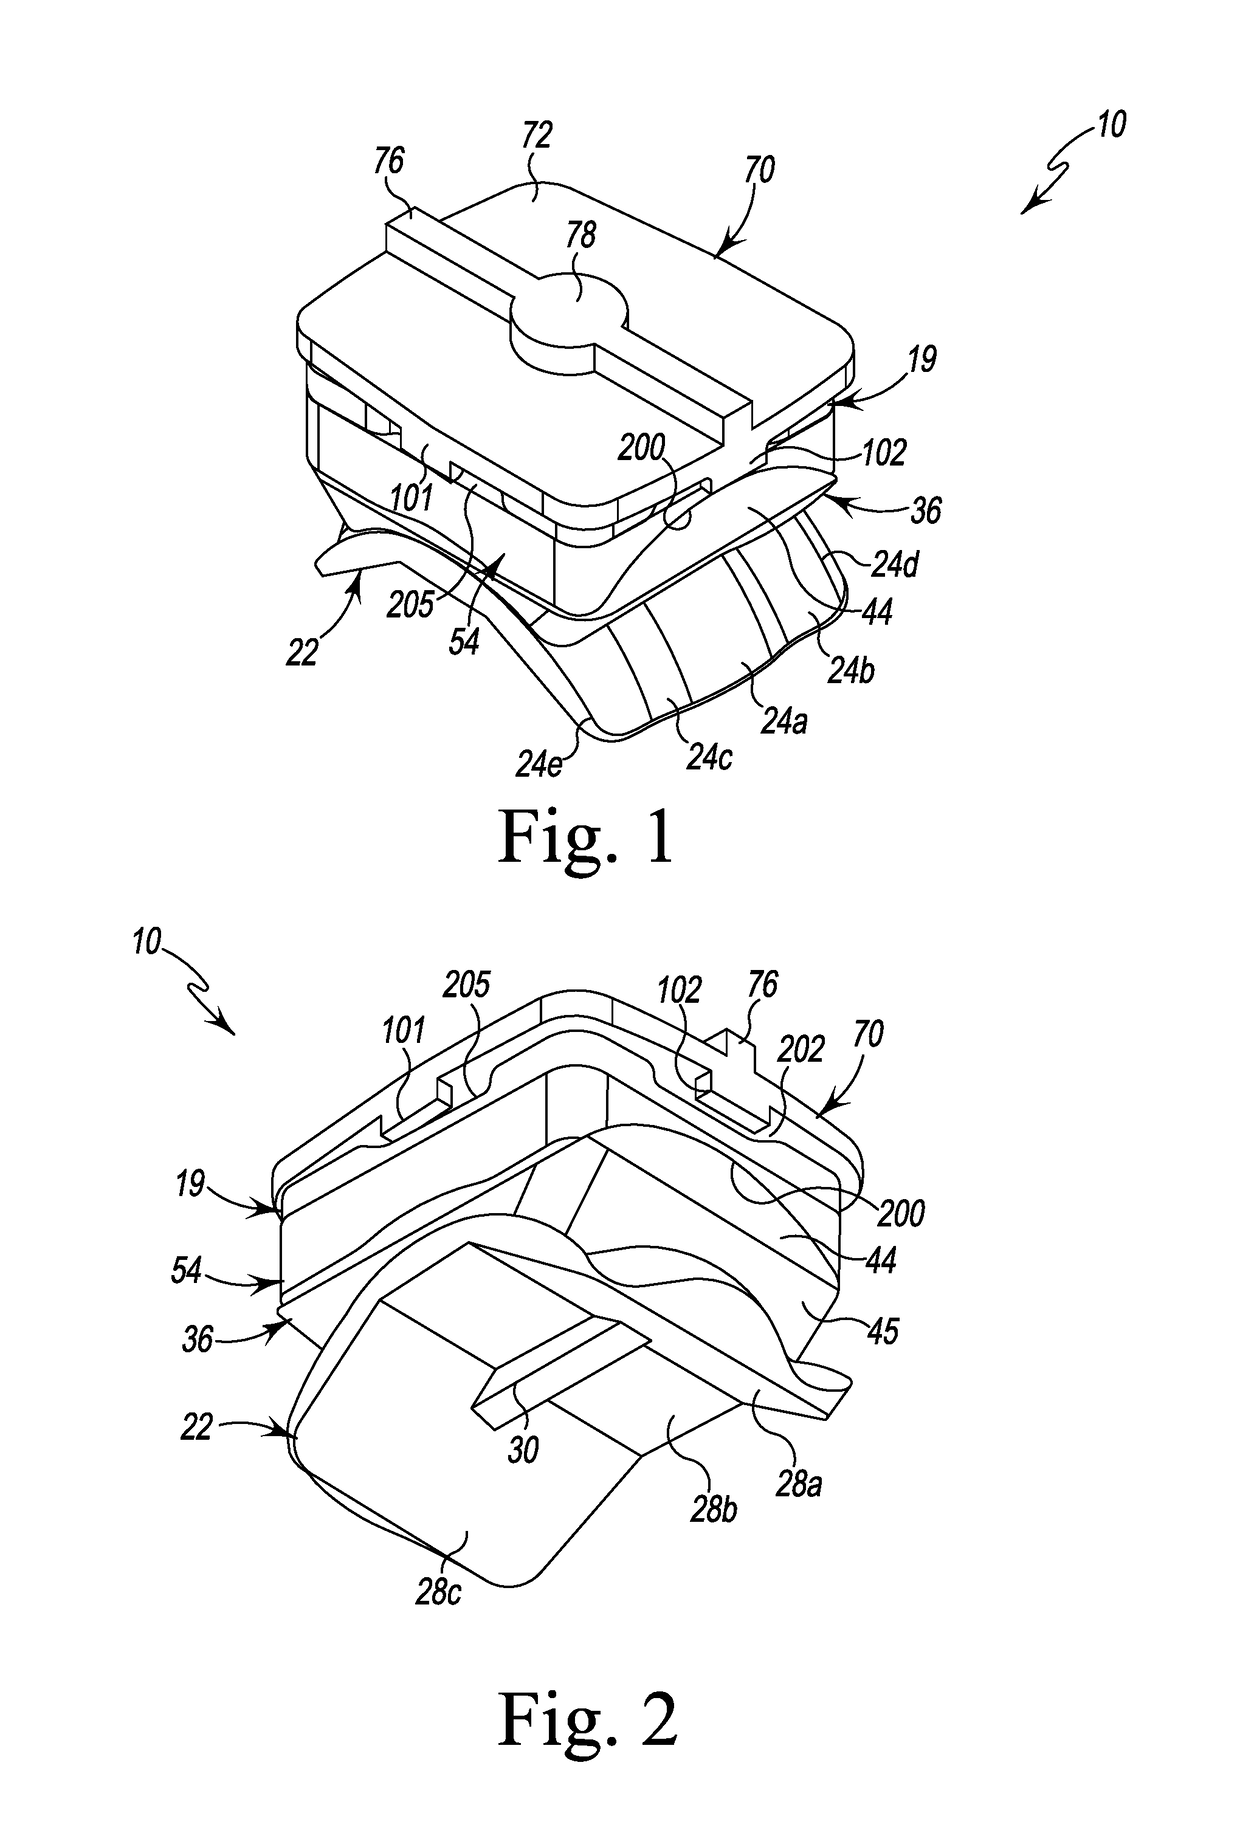 Ankle joint replacement implant with bearing interchangeability